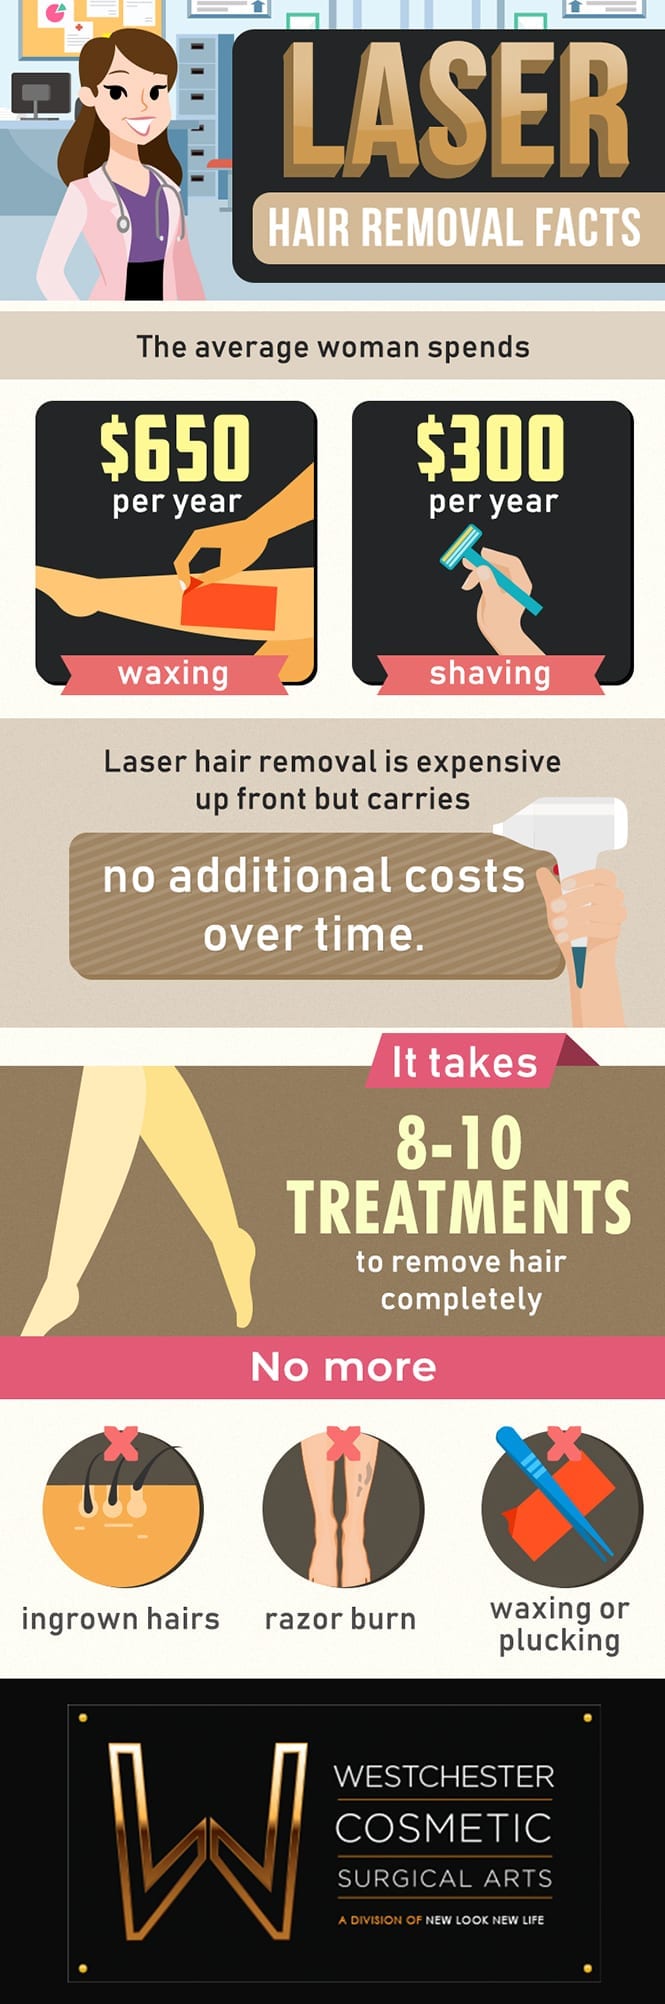 Laser hair removal graphic shows benefits over shaving 